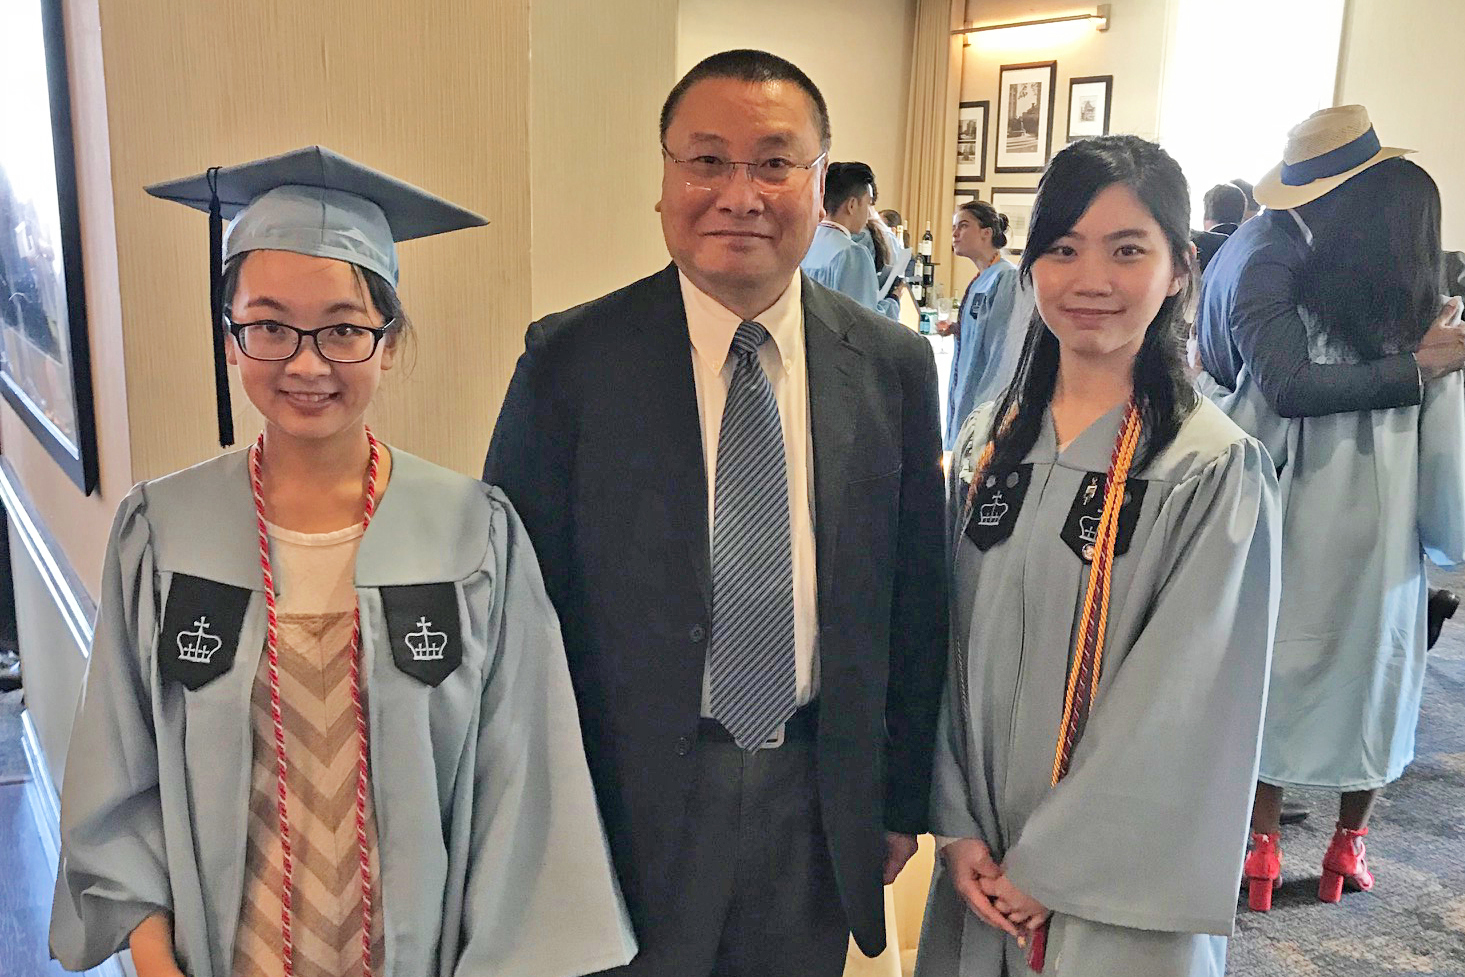 Two CLASS students graduate from the Joint Bachelor’s Degree Program between CityU and Columbia University